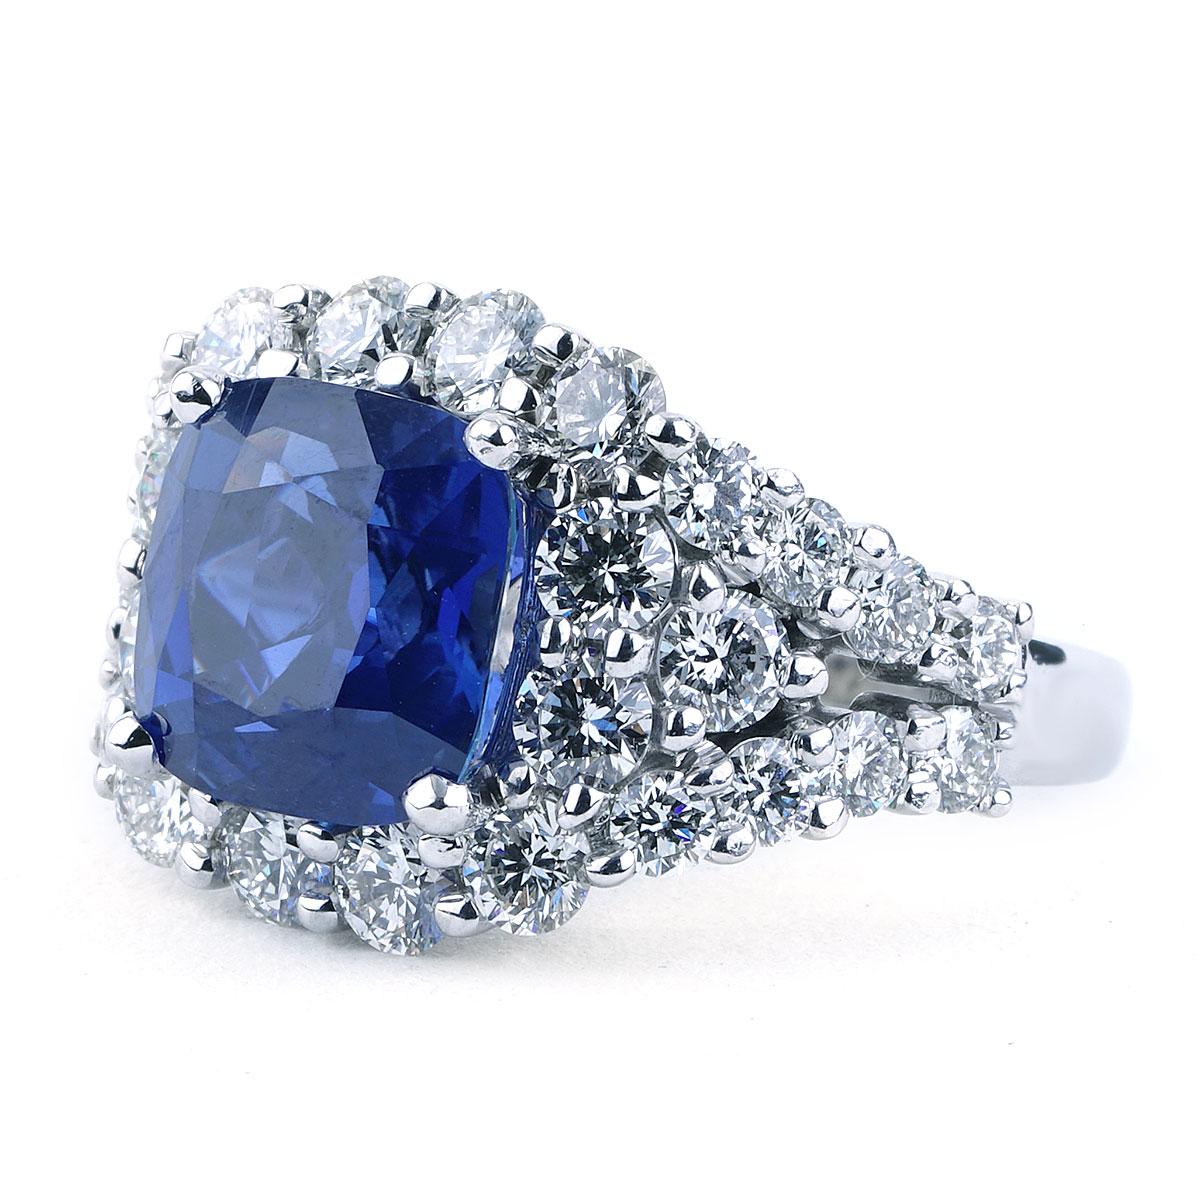 Cushion Cut 5.42 CT GIA Certified Unheated Blue Ceylon Sapphire and Diamond Ring 18K Gold For Sale